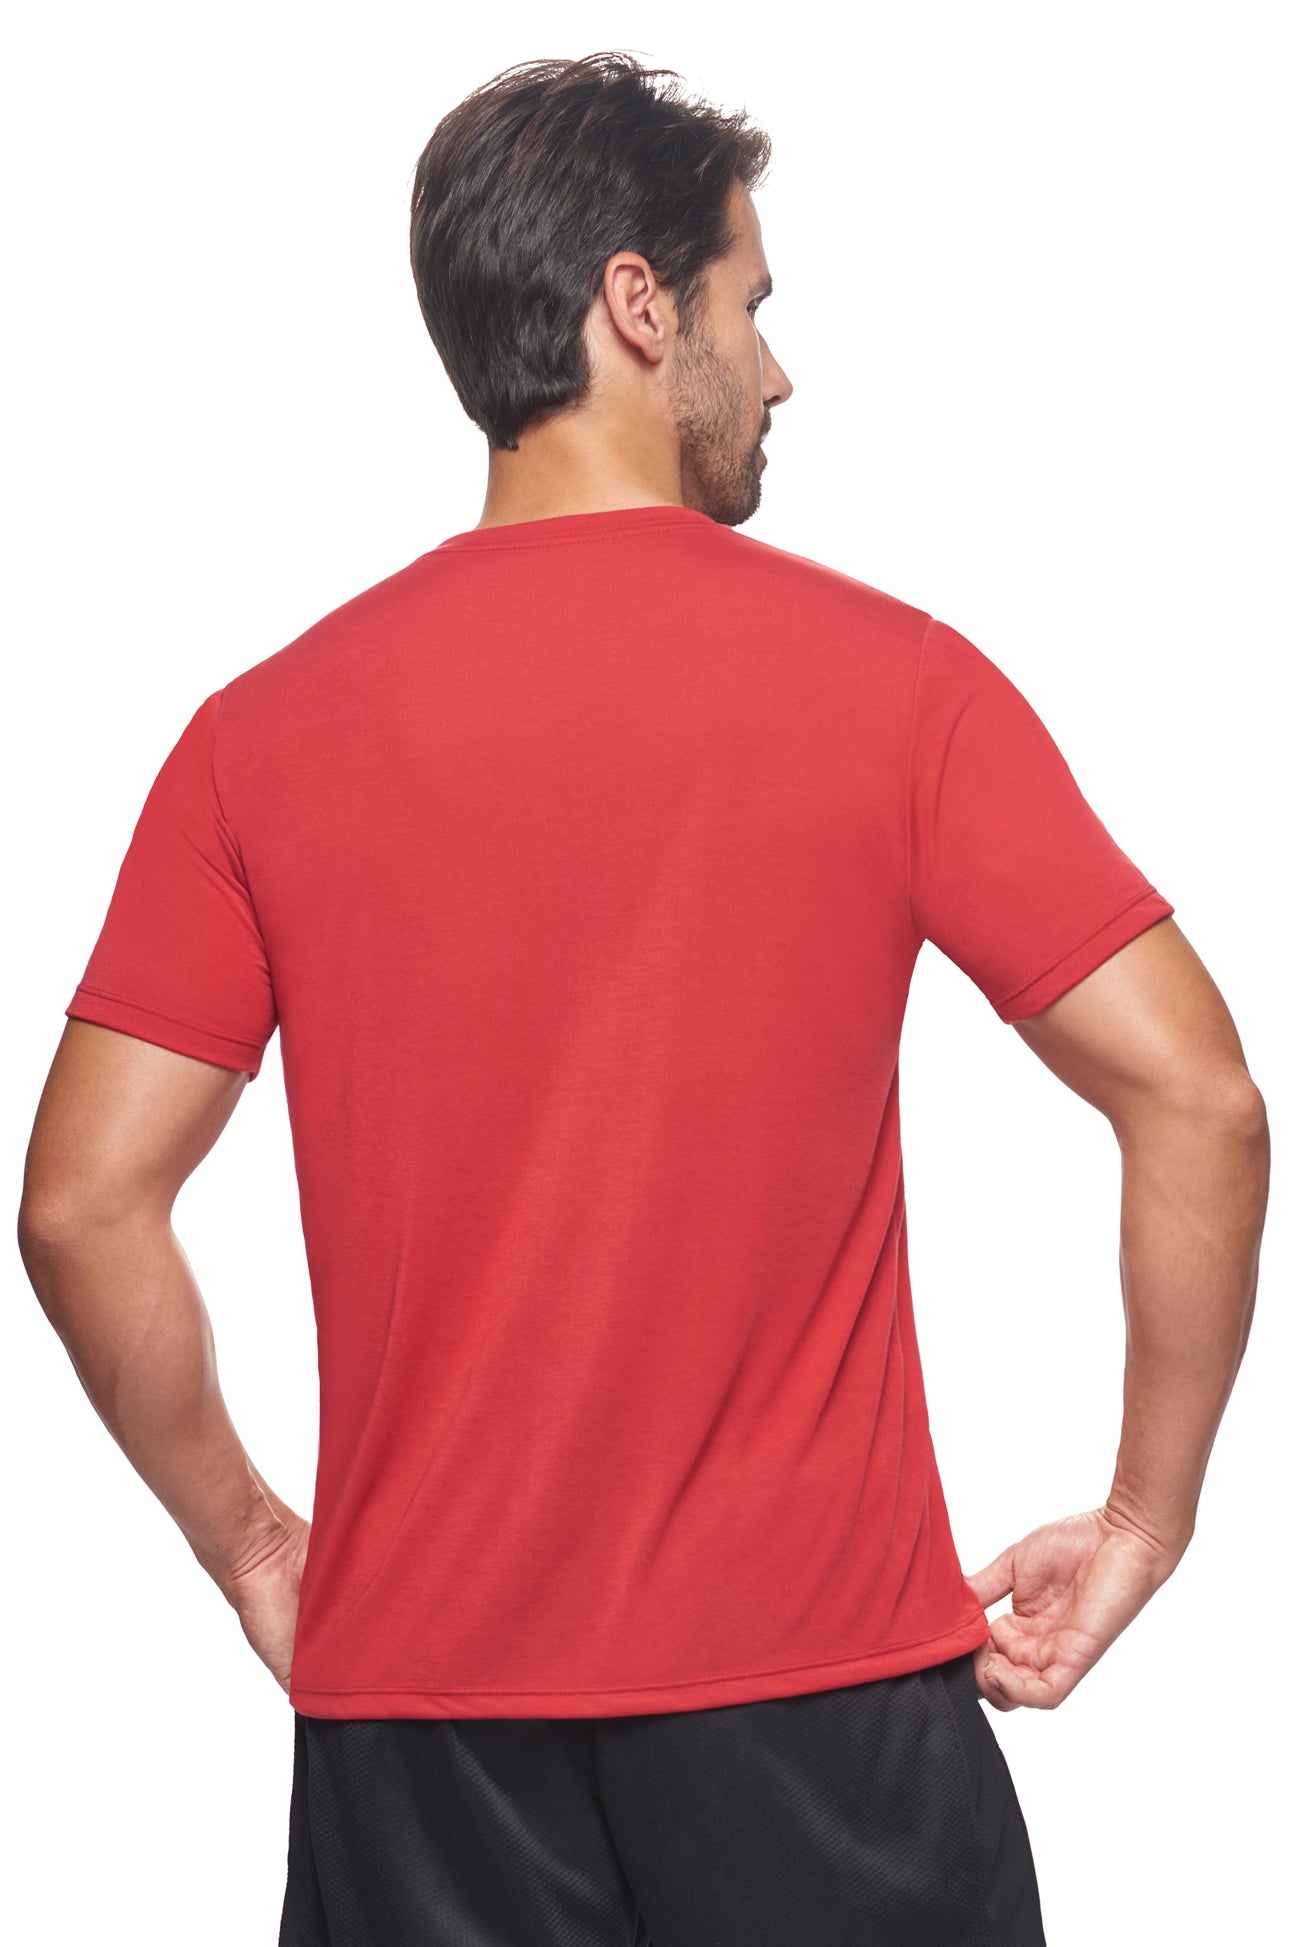 Expert Brand Retail Super Soft Eco-Friendly Performance Apparel Fashion Sportswear Men's Crewneck T-Shirt Made in USA scarlet 3#color_scarlet